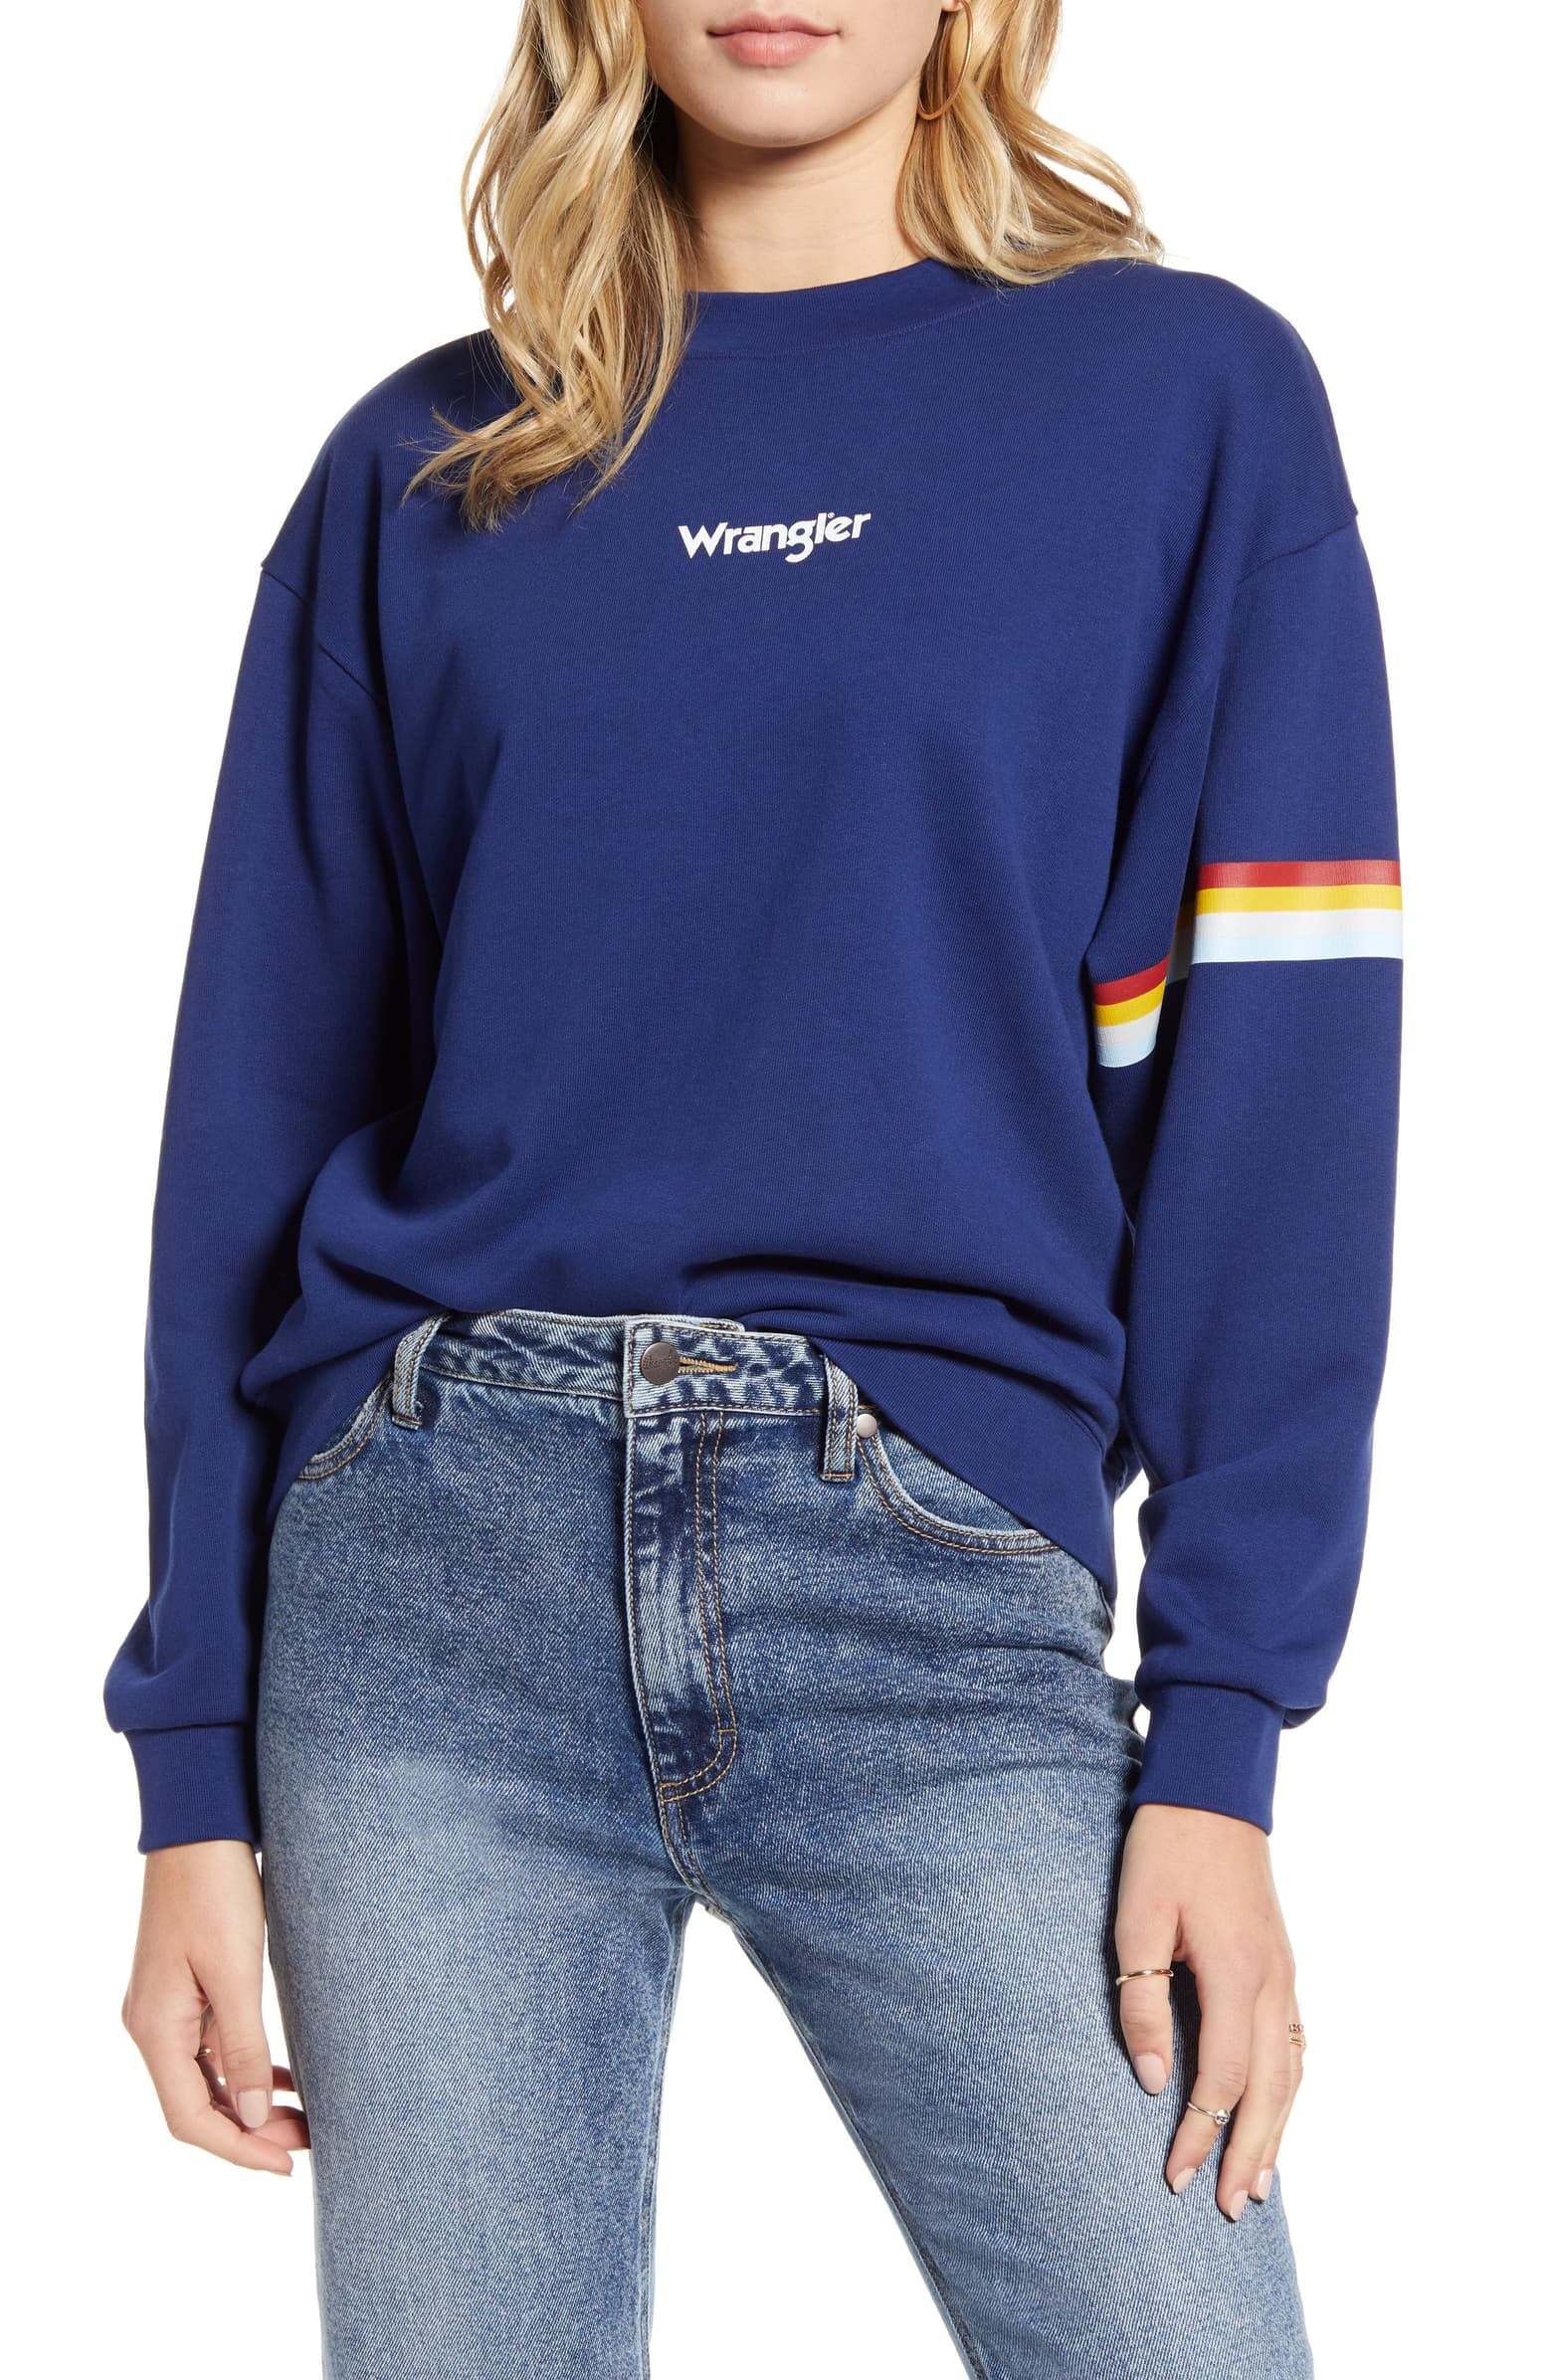 Wrangler '80s Retro Sweatshirt | 12 Sweatshirts That Pair With Everything  From Blazers and Jeans to Leggings and Sneakers | POPSUGAR Fashion Photo 9